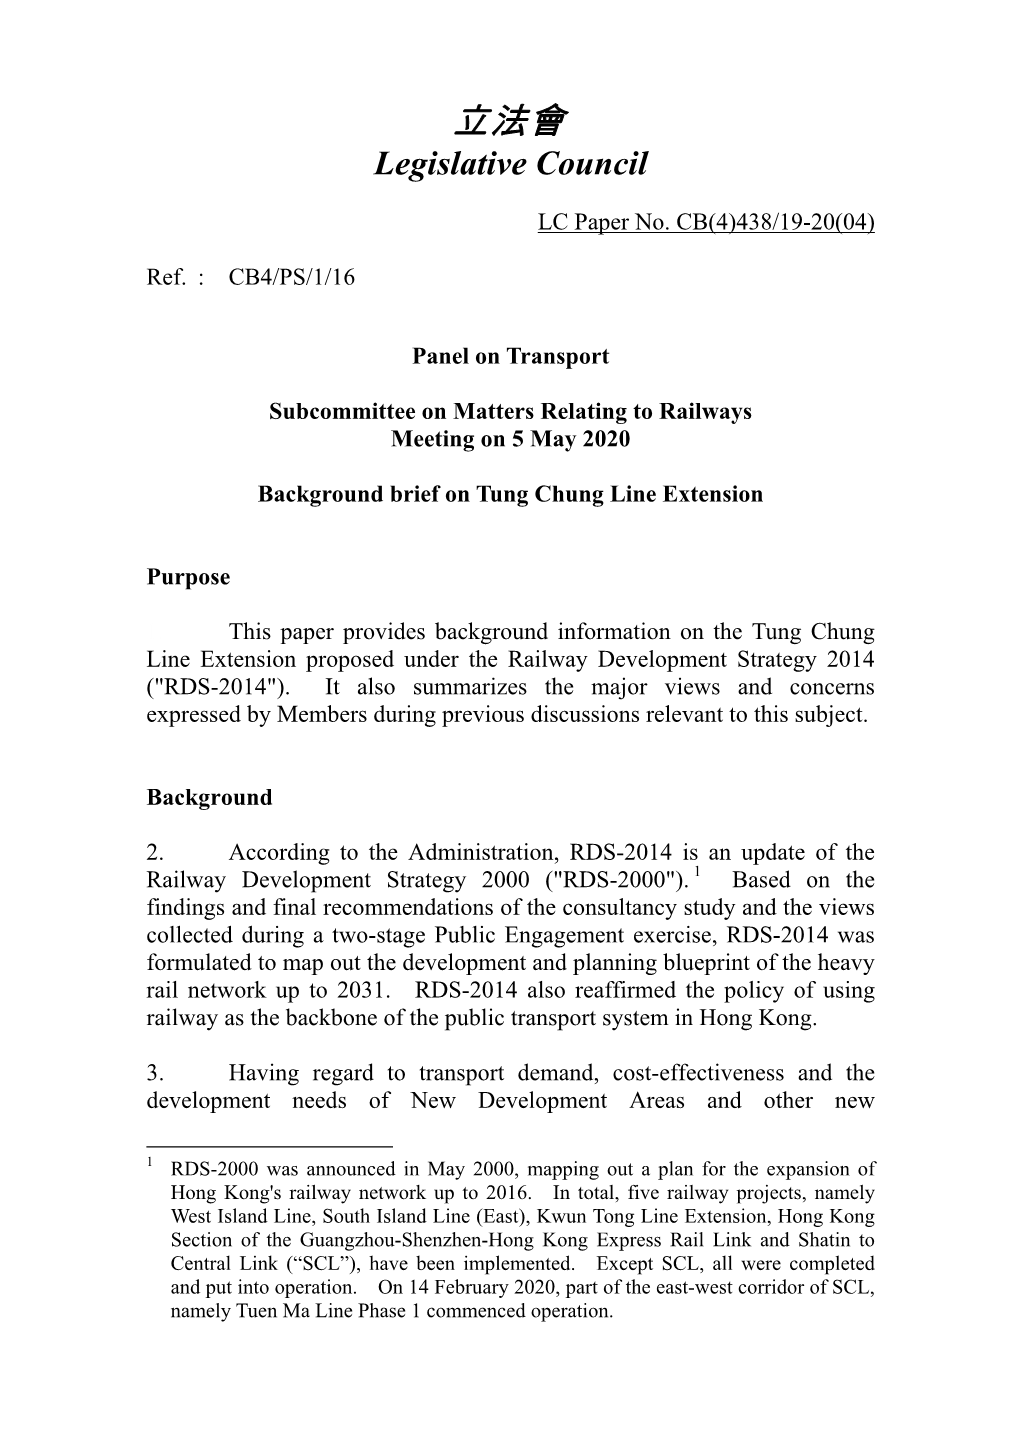 Paper on Tung Chung Line Extension Prepared by the Legislative